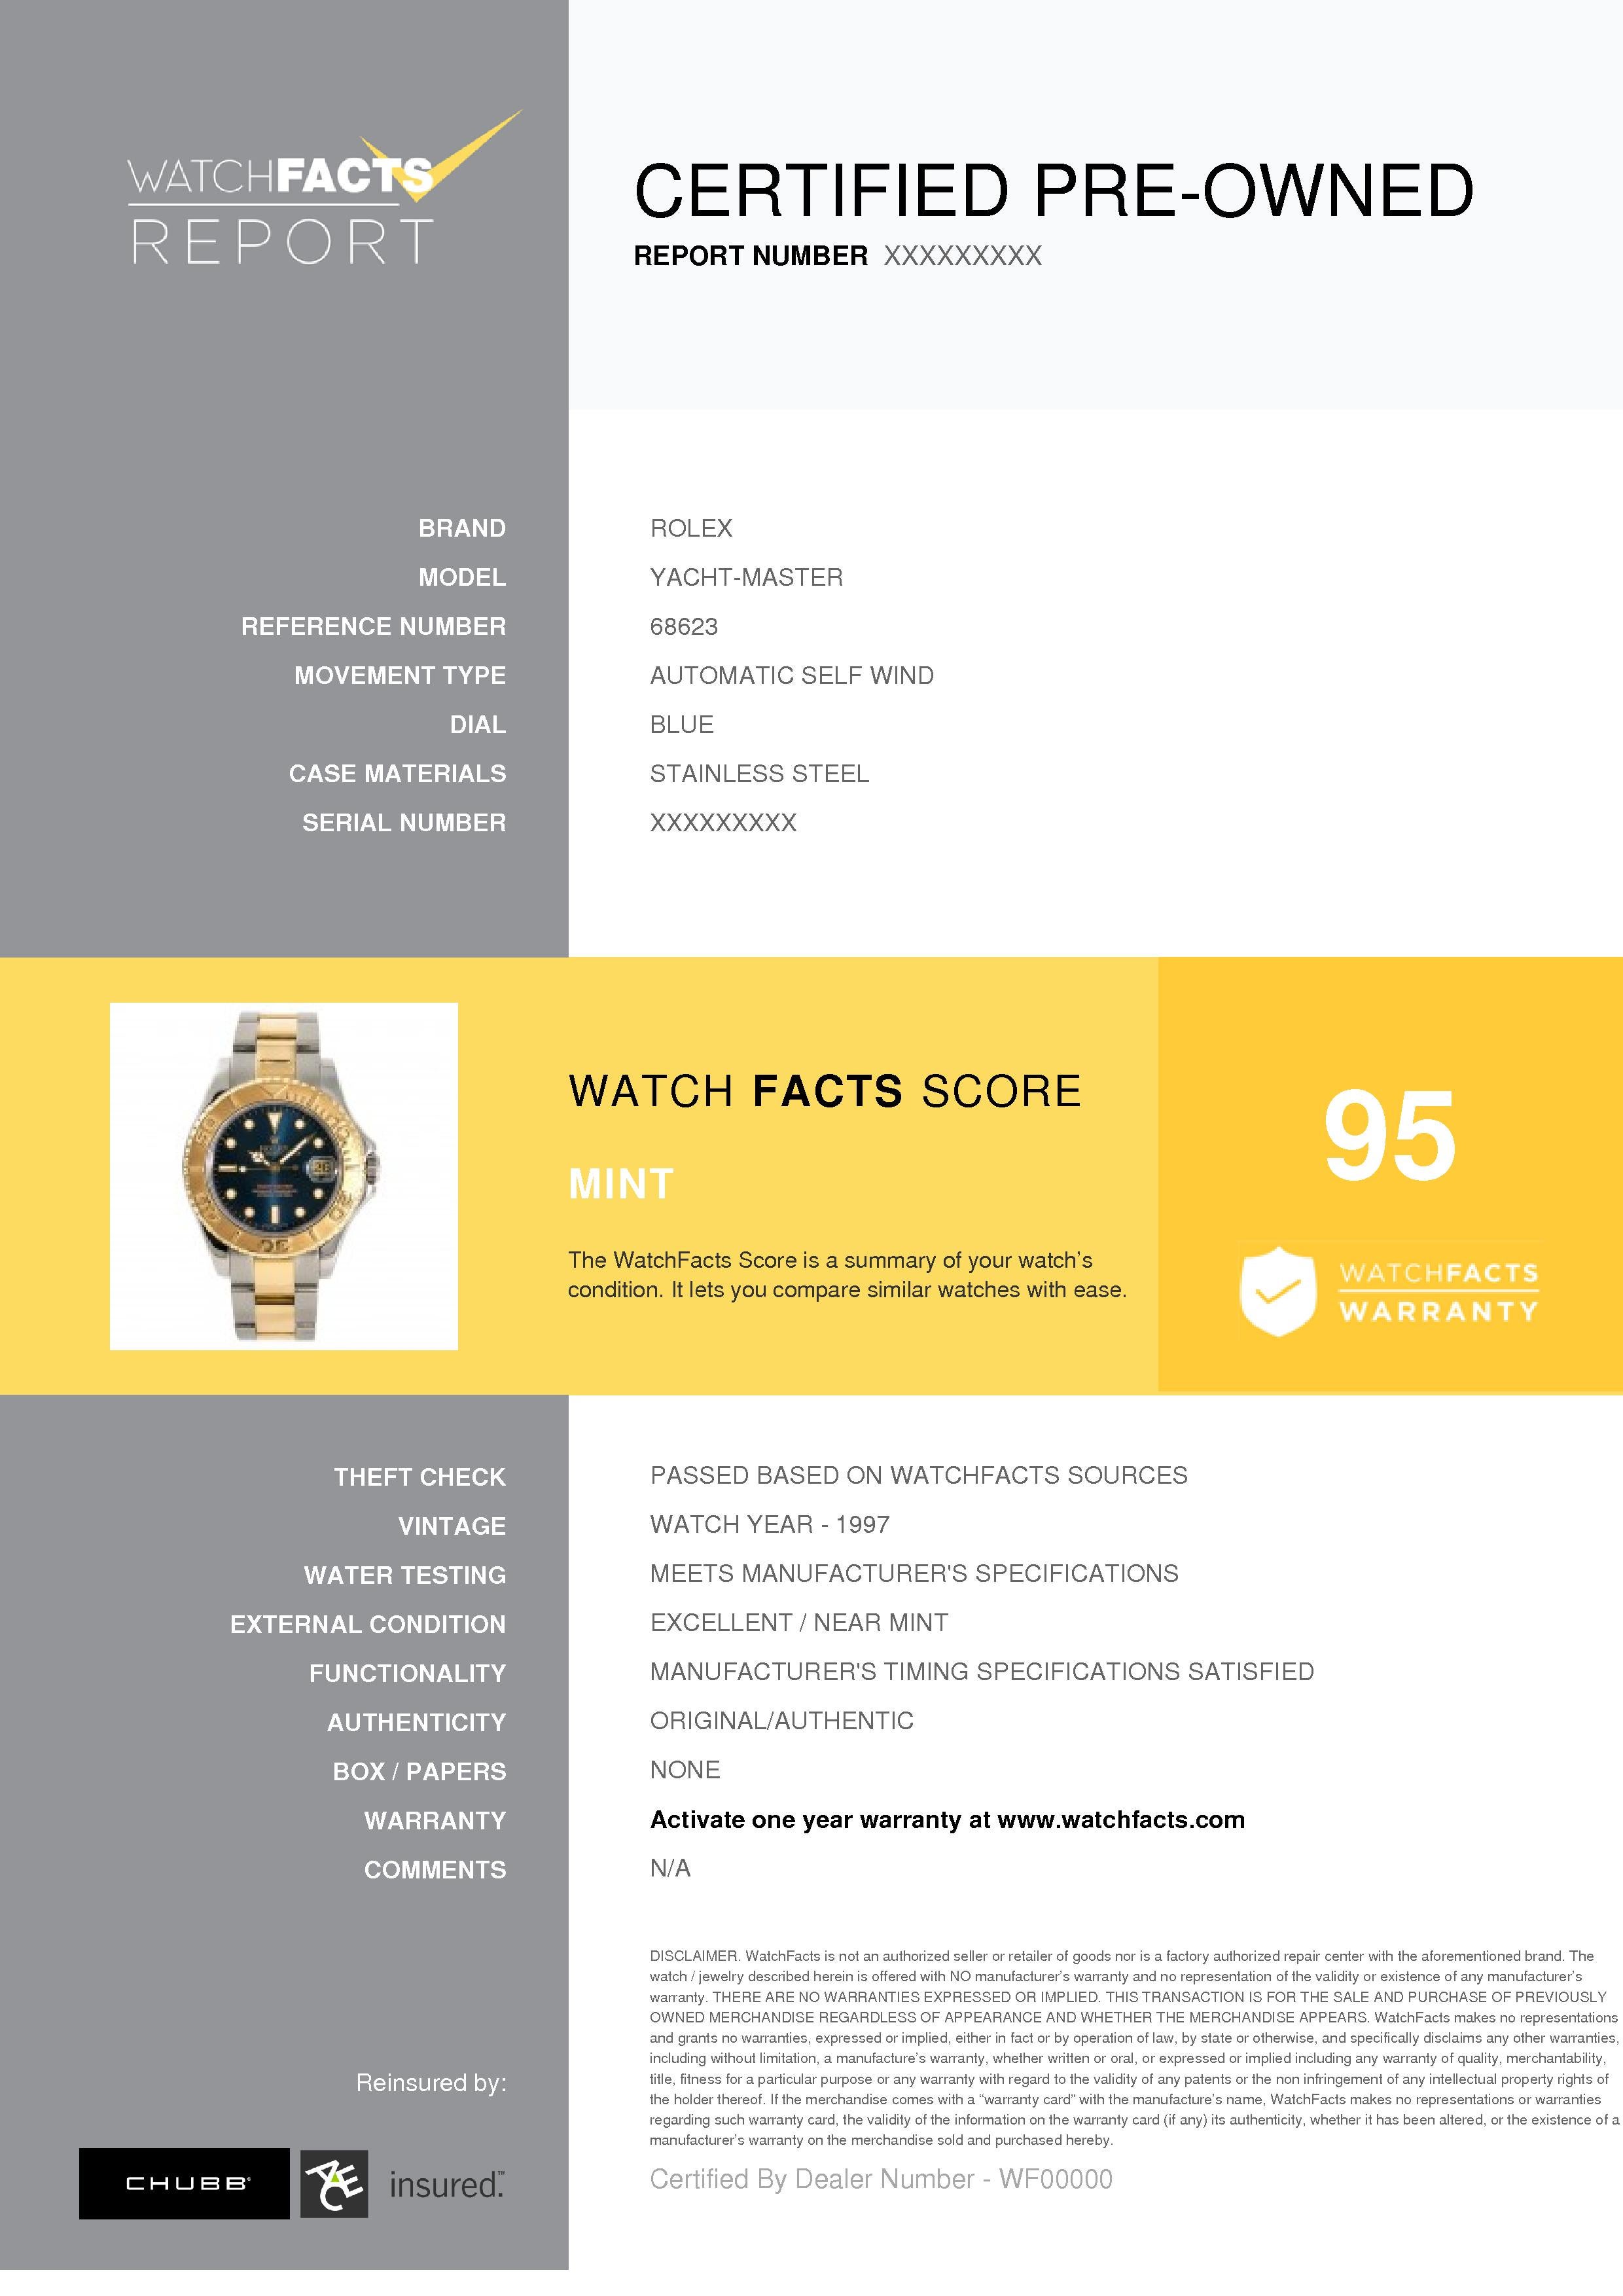 Rolex Yacht-Master Reference #:68623. Rolex Yacht-Master 68623 Blue Dial Unisex Automatic Watch 18k Two Tone SS 35mm. Verified and Certified by WatchFacts. 1 year warranty offered by WatchFacts.
